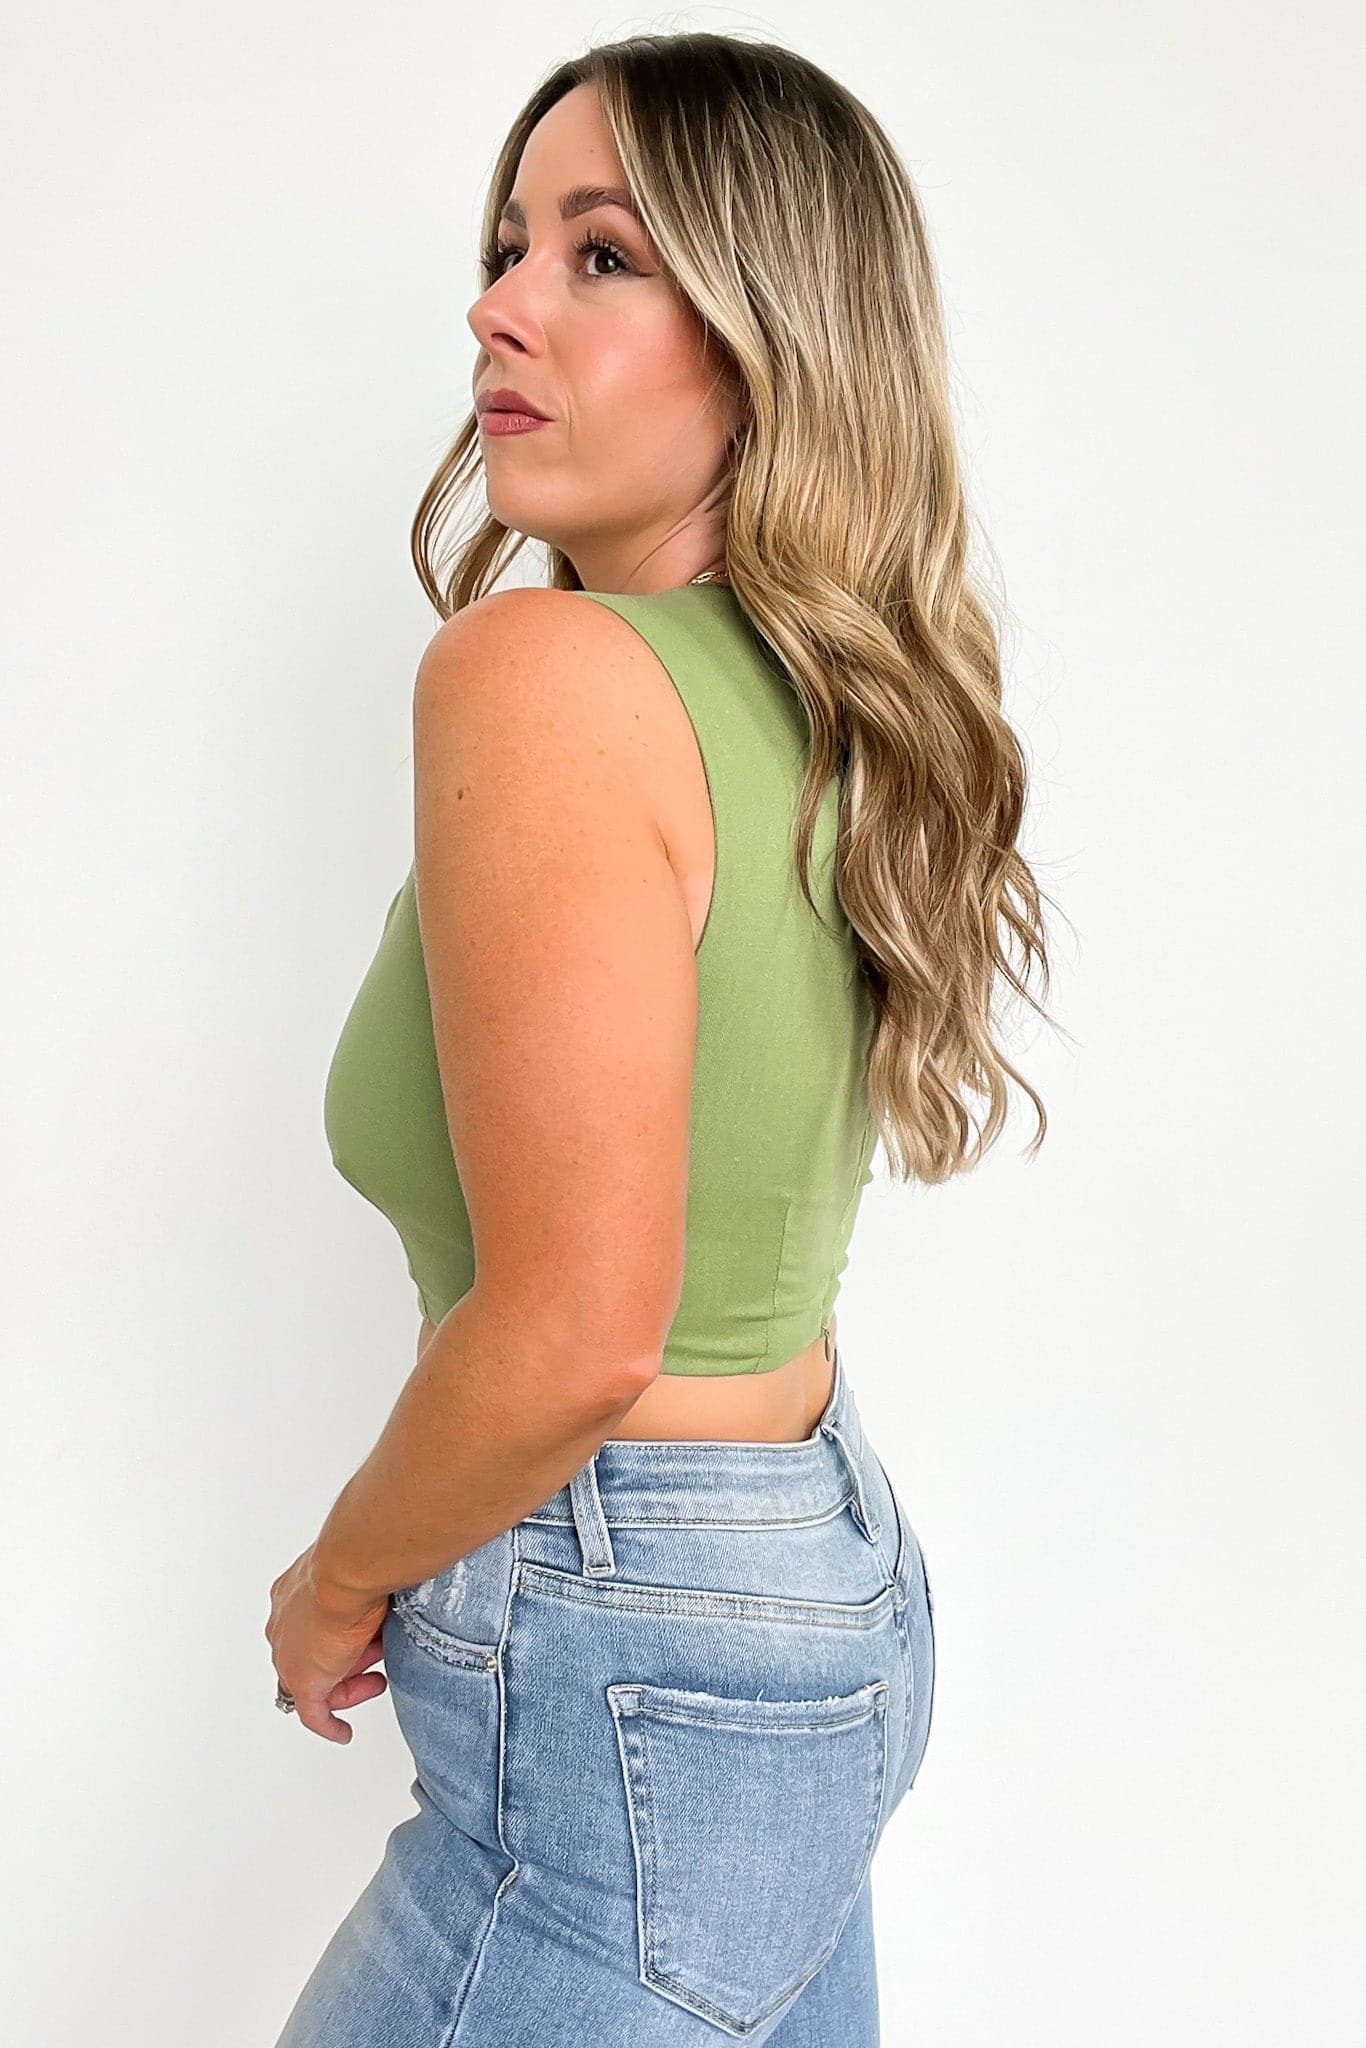  Miami Afternoons Cutout Crop Top - FINAL SALE - Madison and Mallory